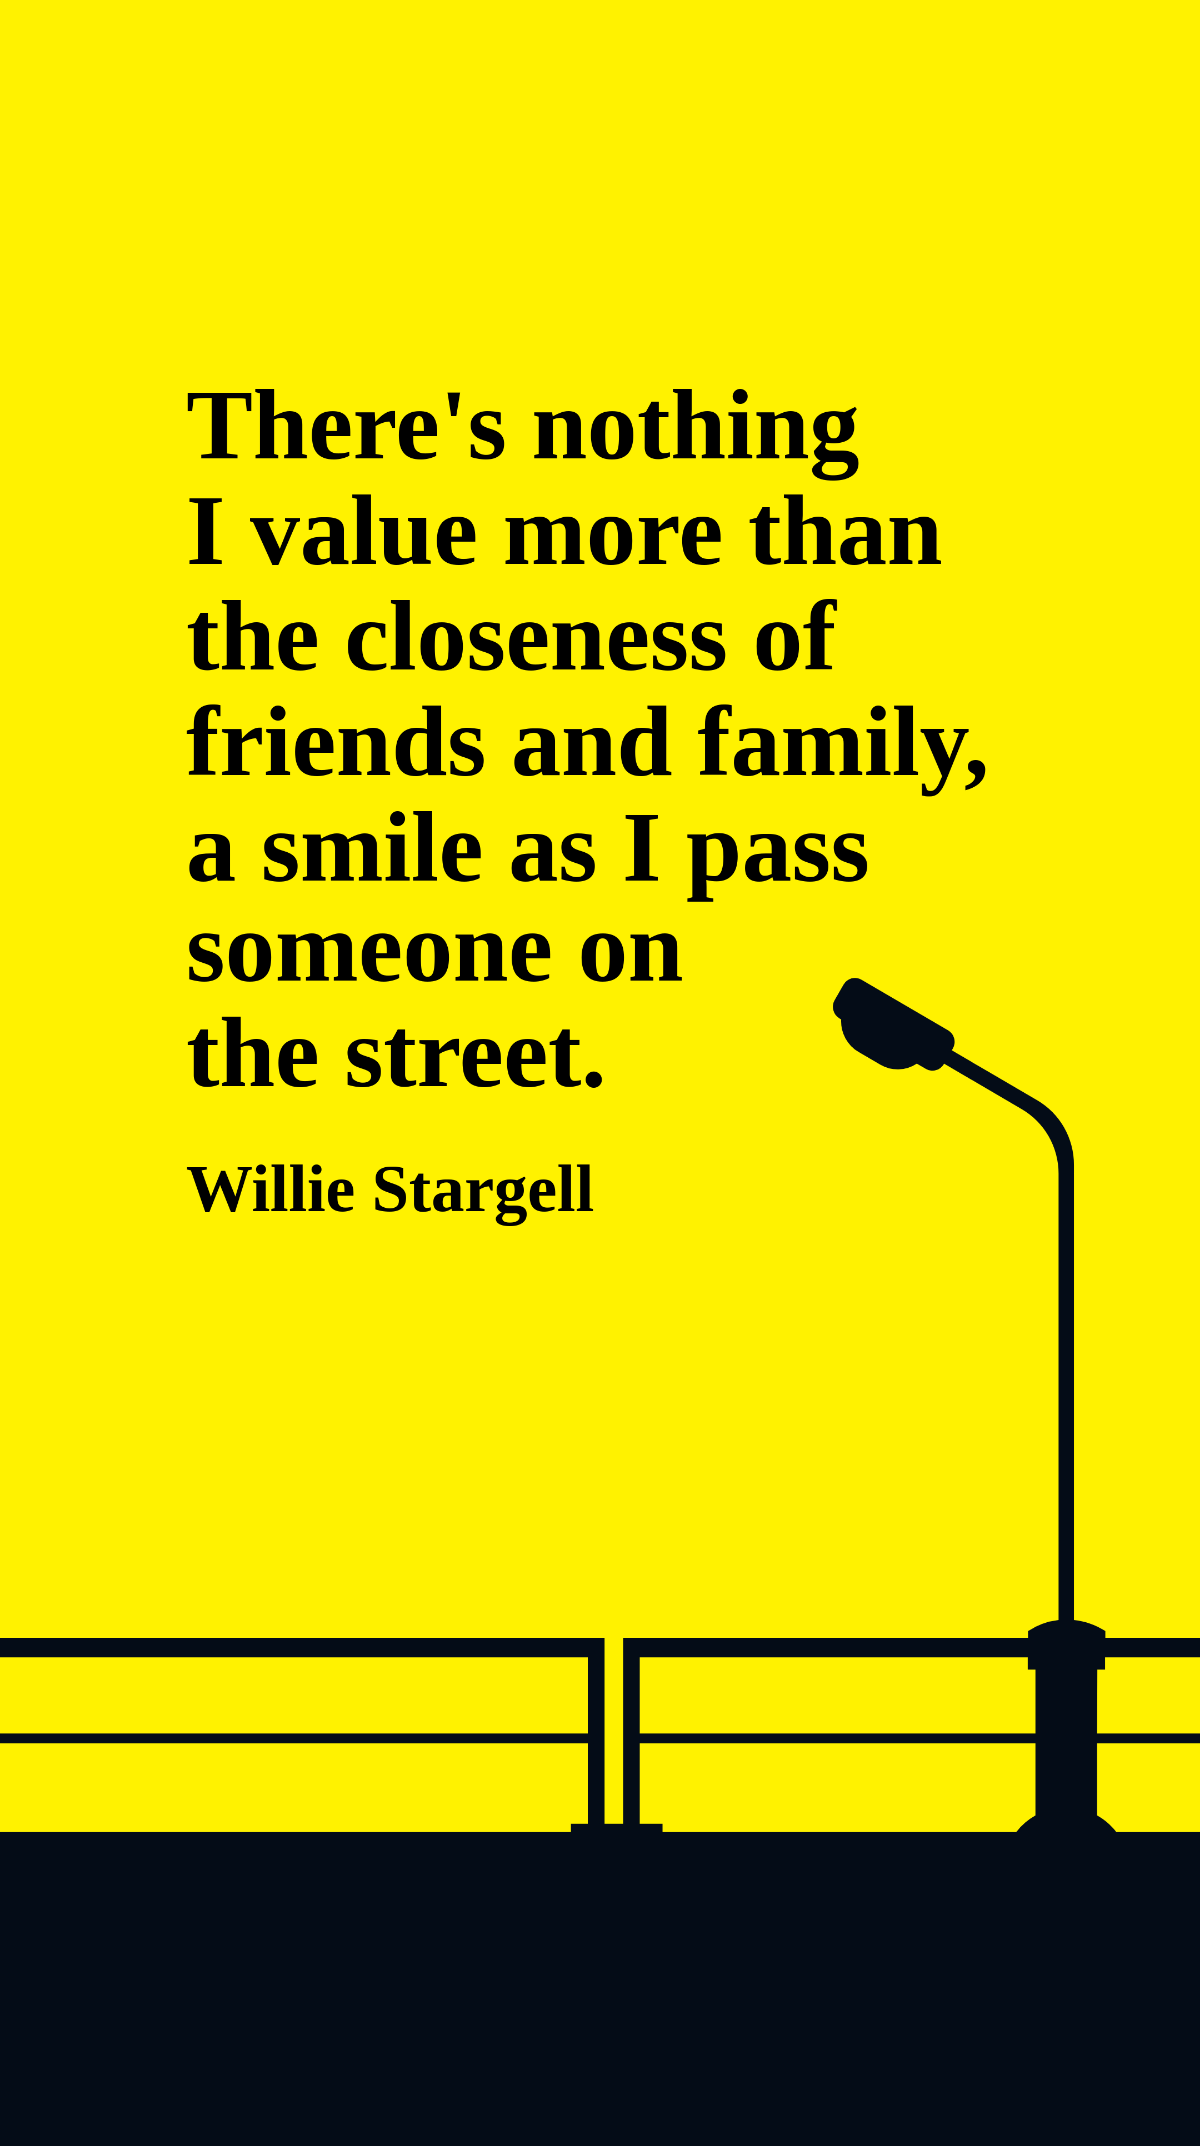 Willie Stargell - There's nothing I value more than the closeness of ...